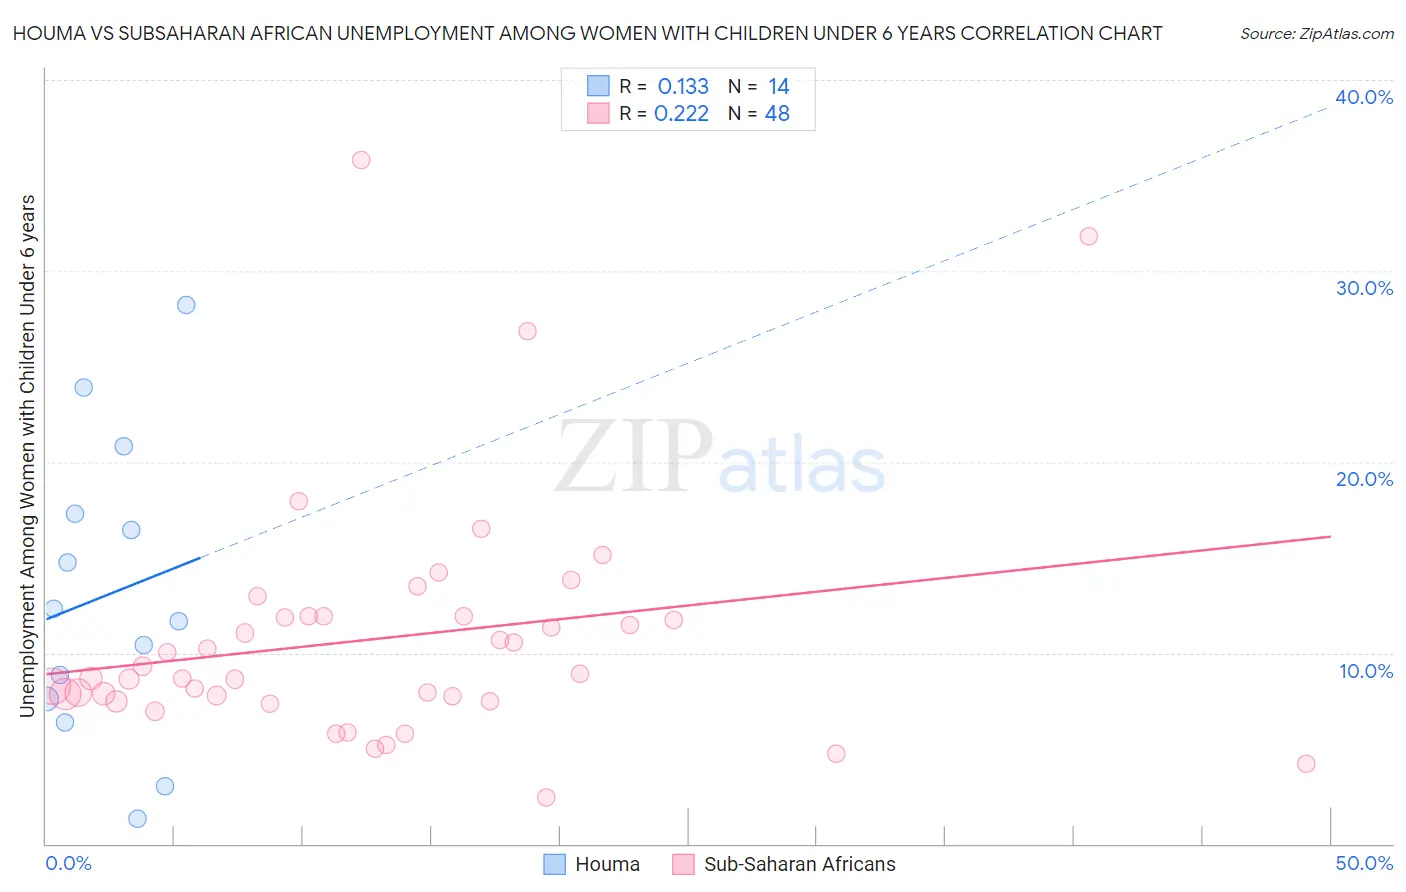 Houma vs Subsaharan African Unemployment Among Women with Children Under 6 years